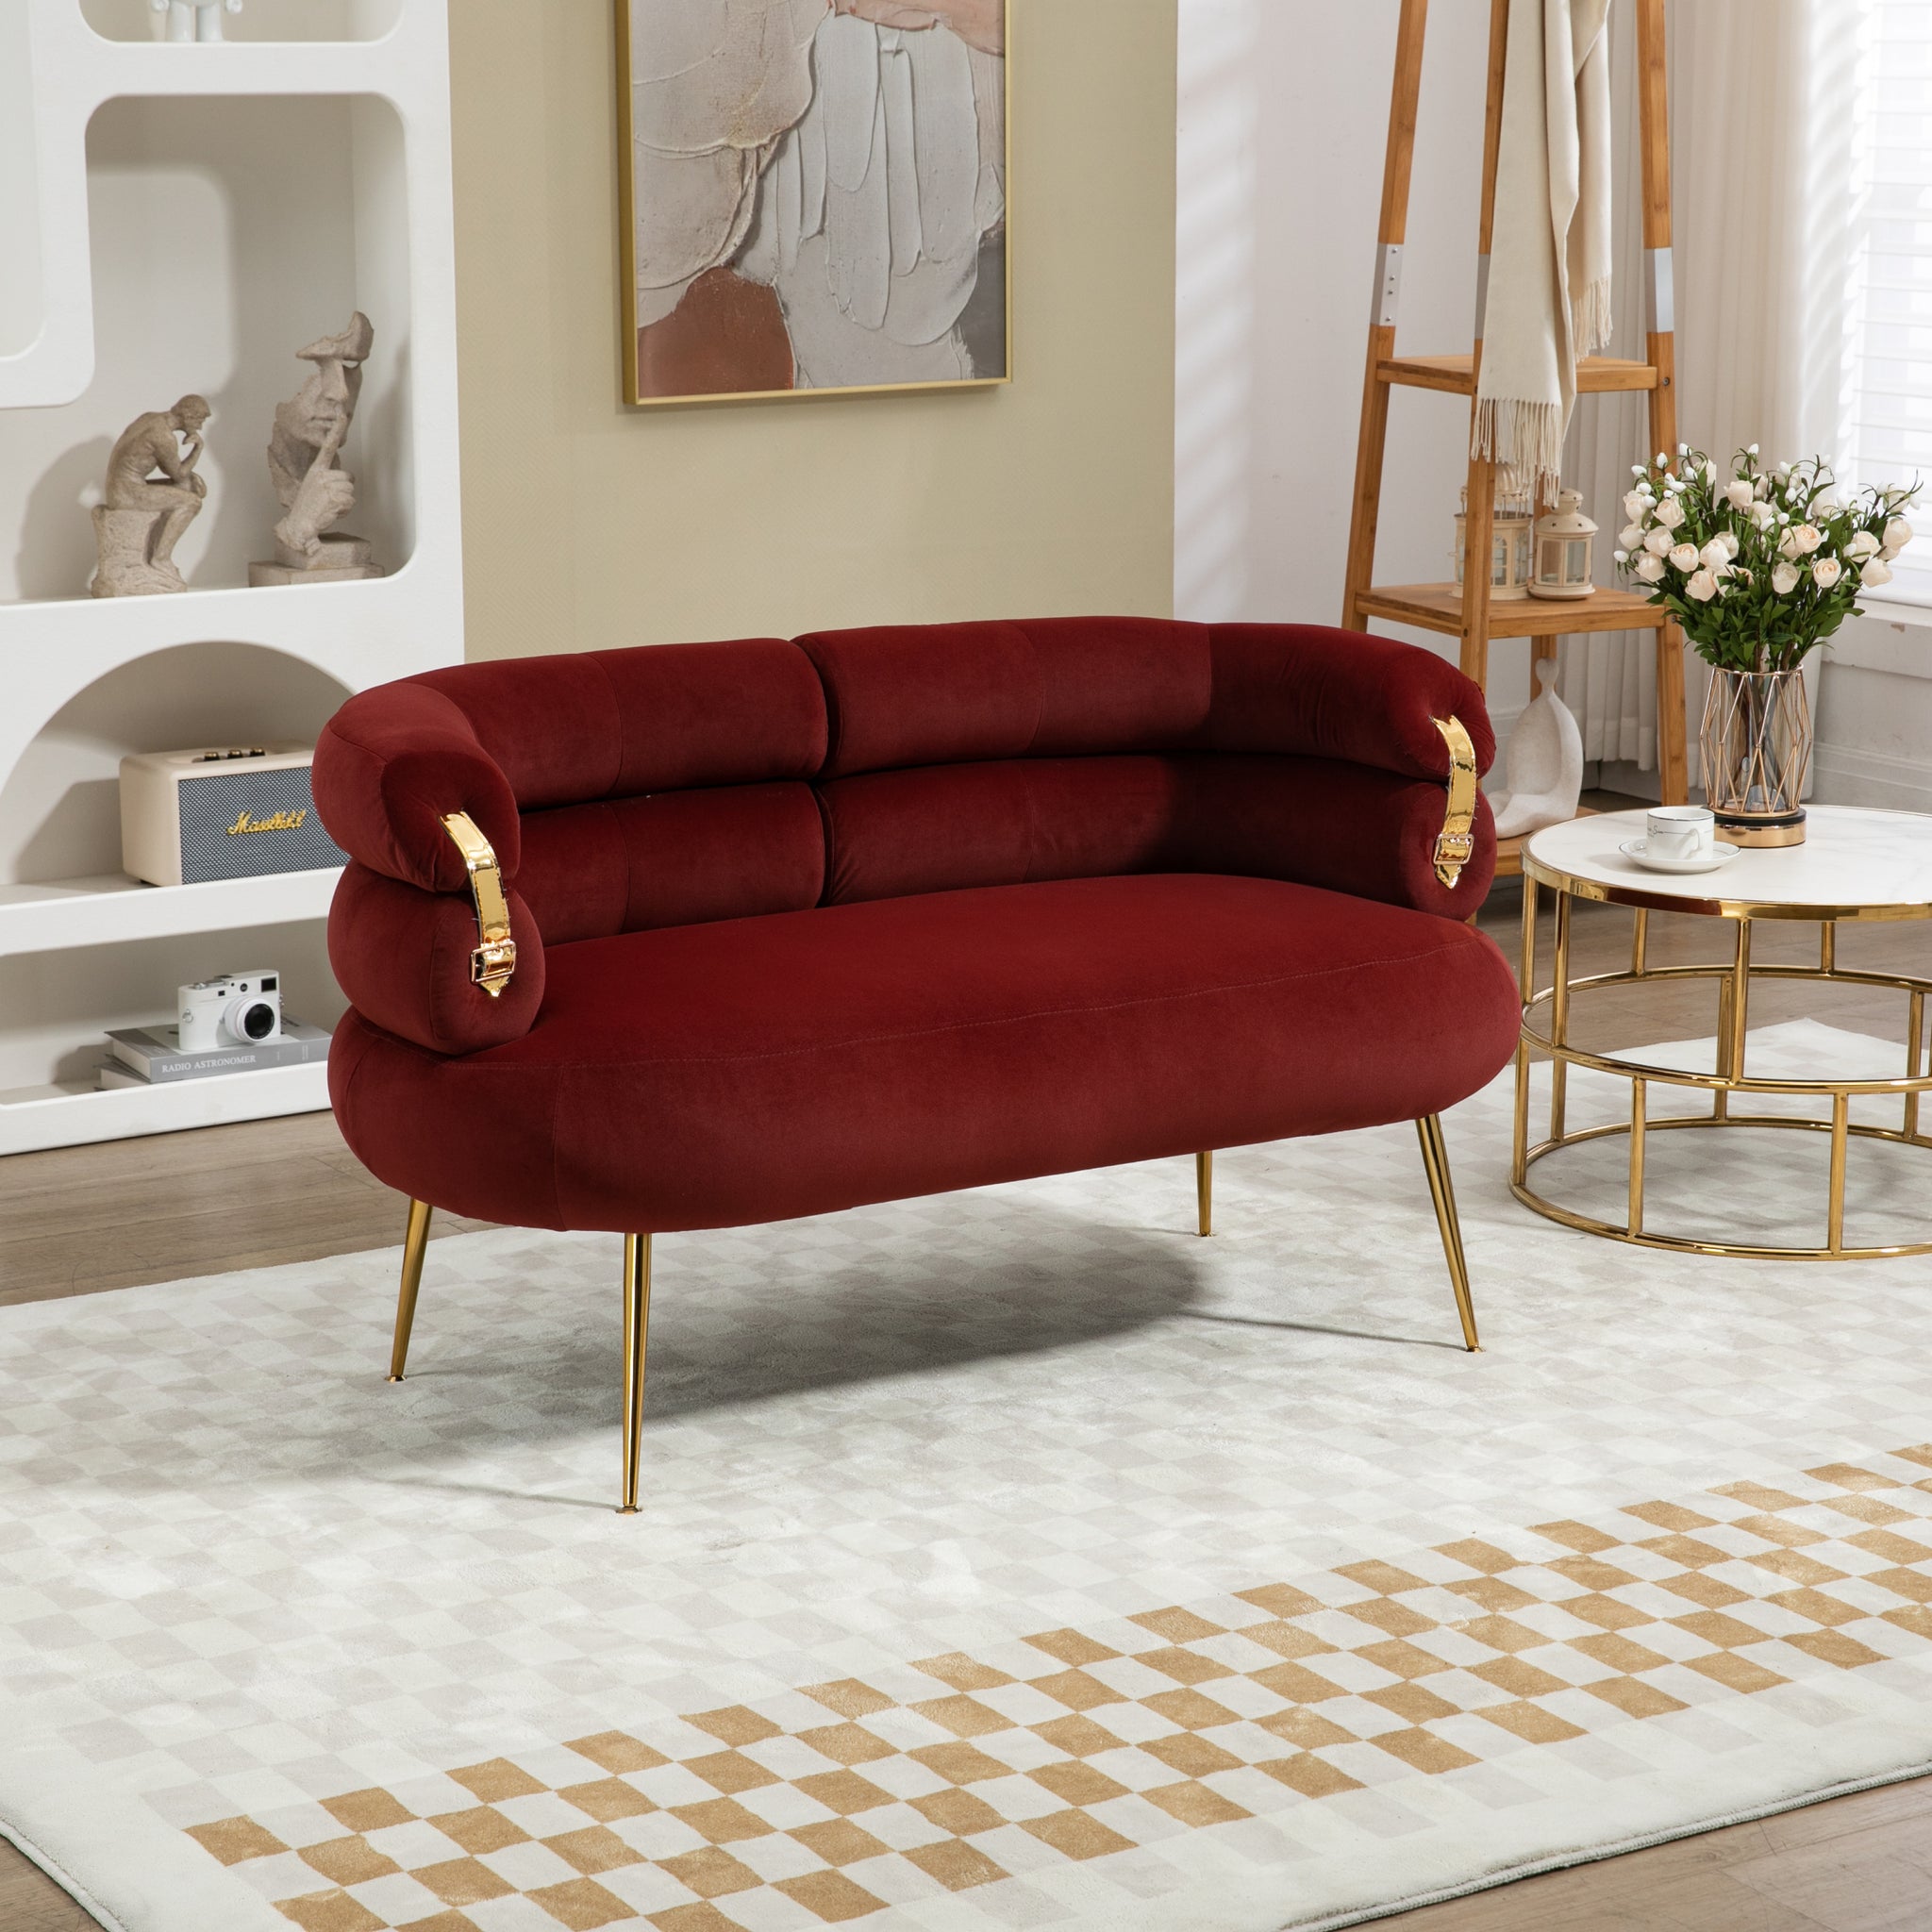 COOLMORE Accent Chair ,leisure chair with Golden feet wine red-velvet